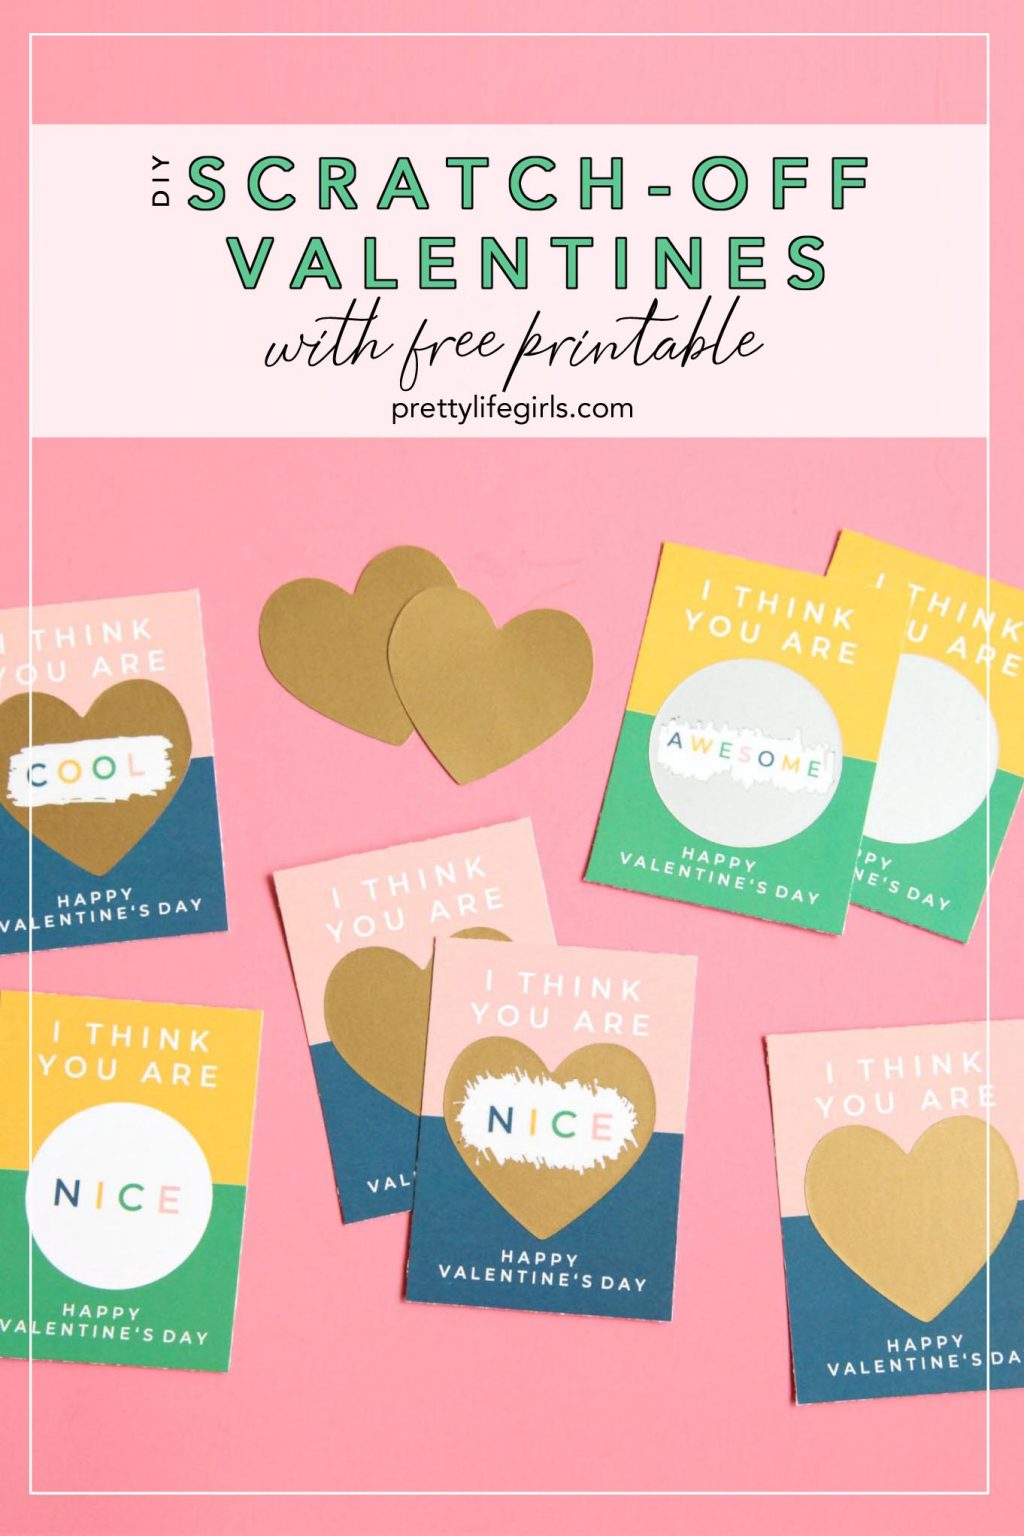 diy-scratch-off-valentines-with-free-printable-the-pretty-life-girls